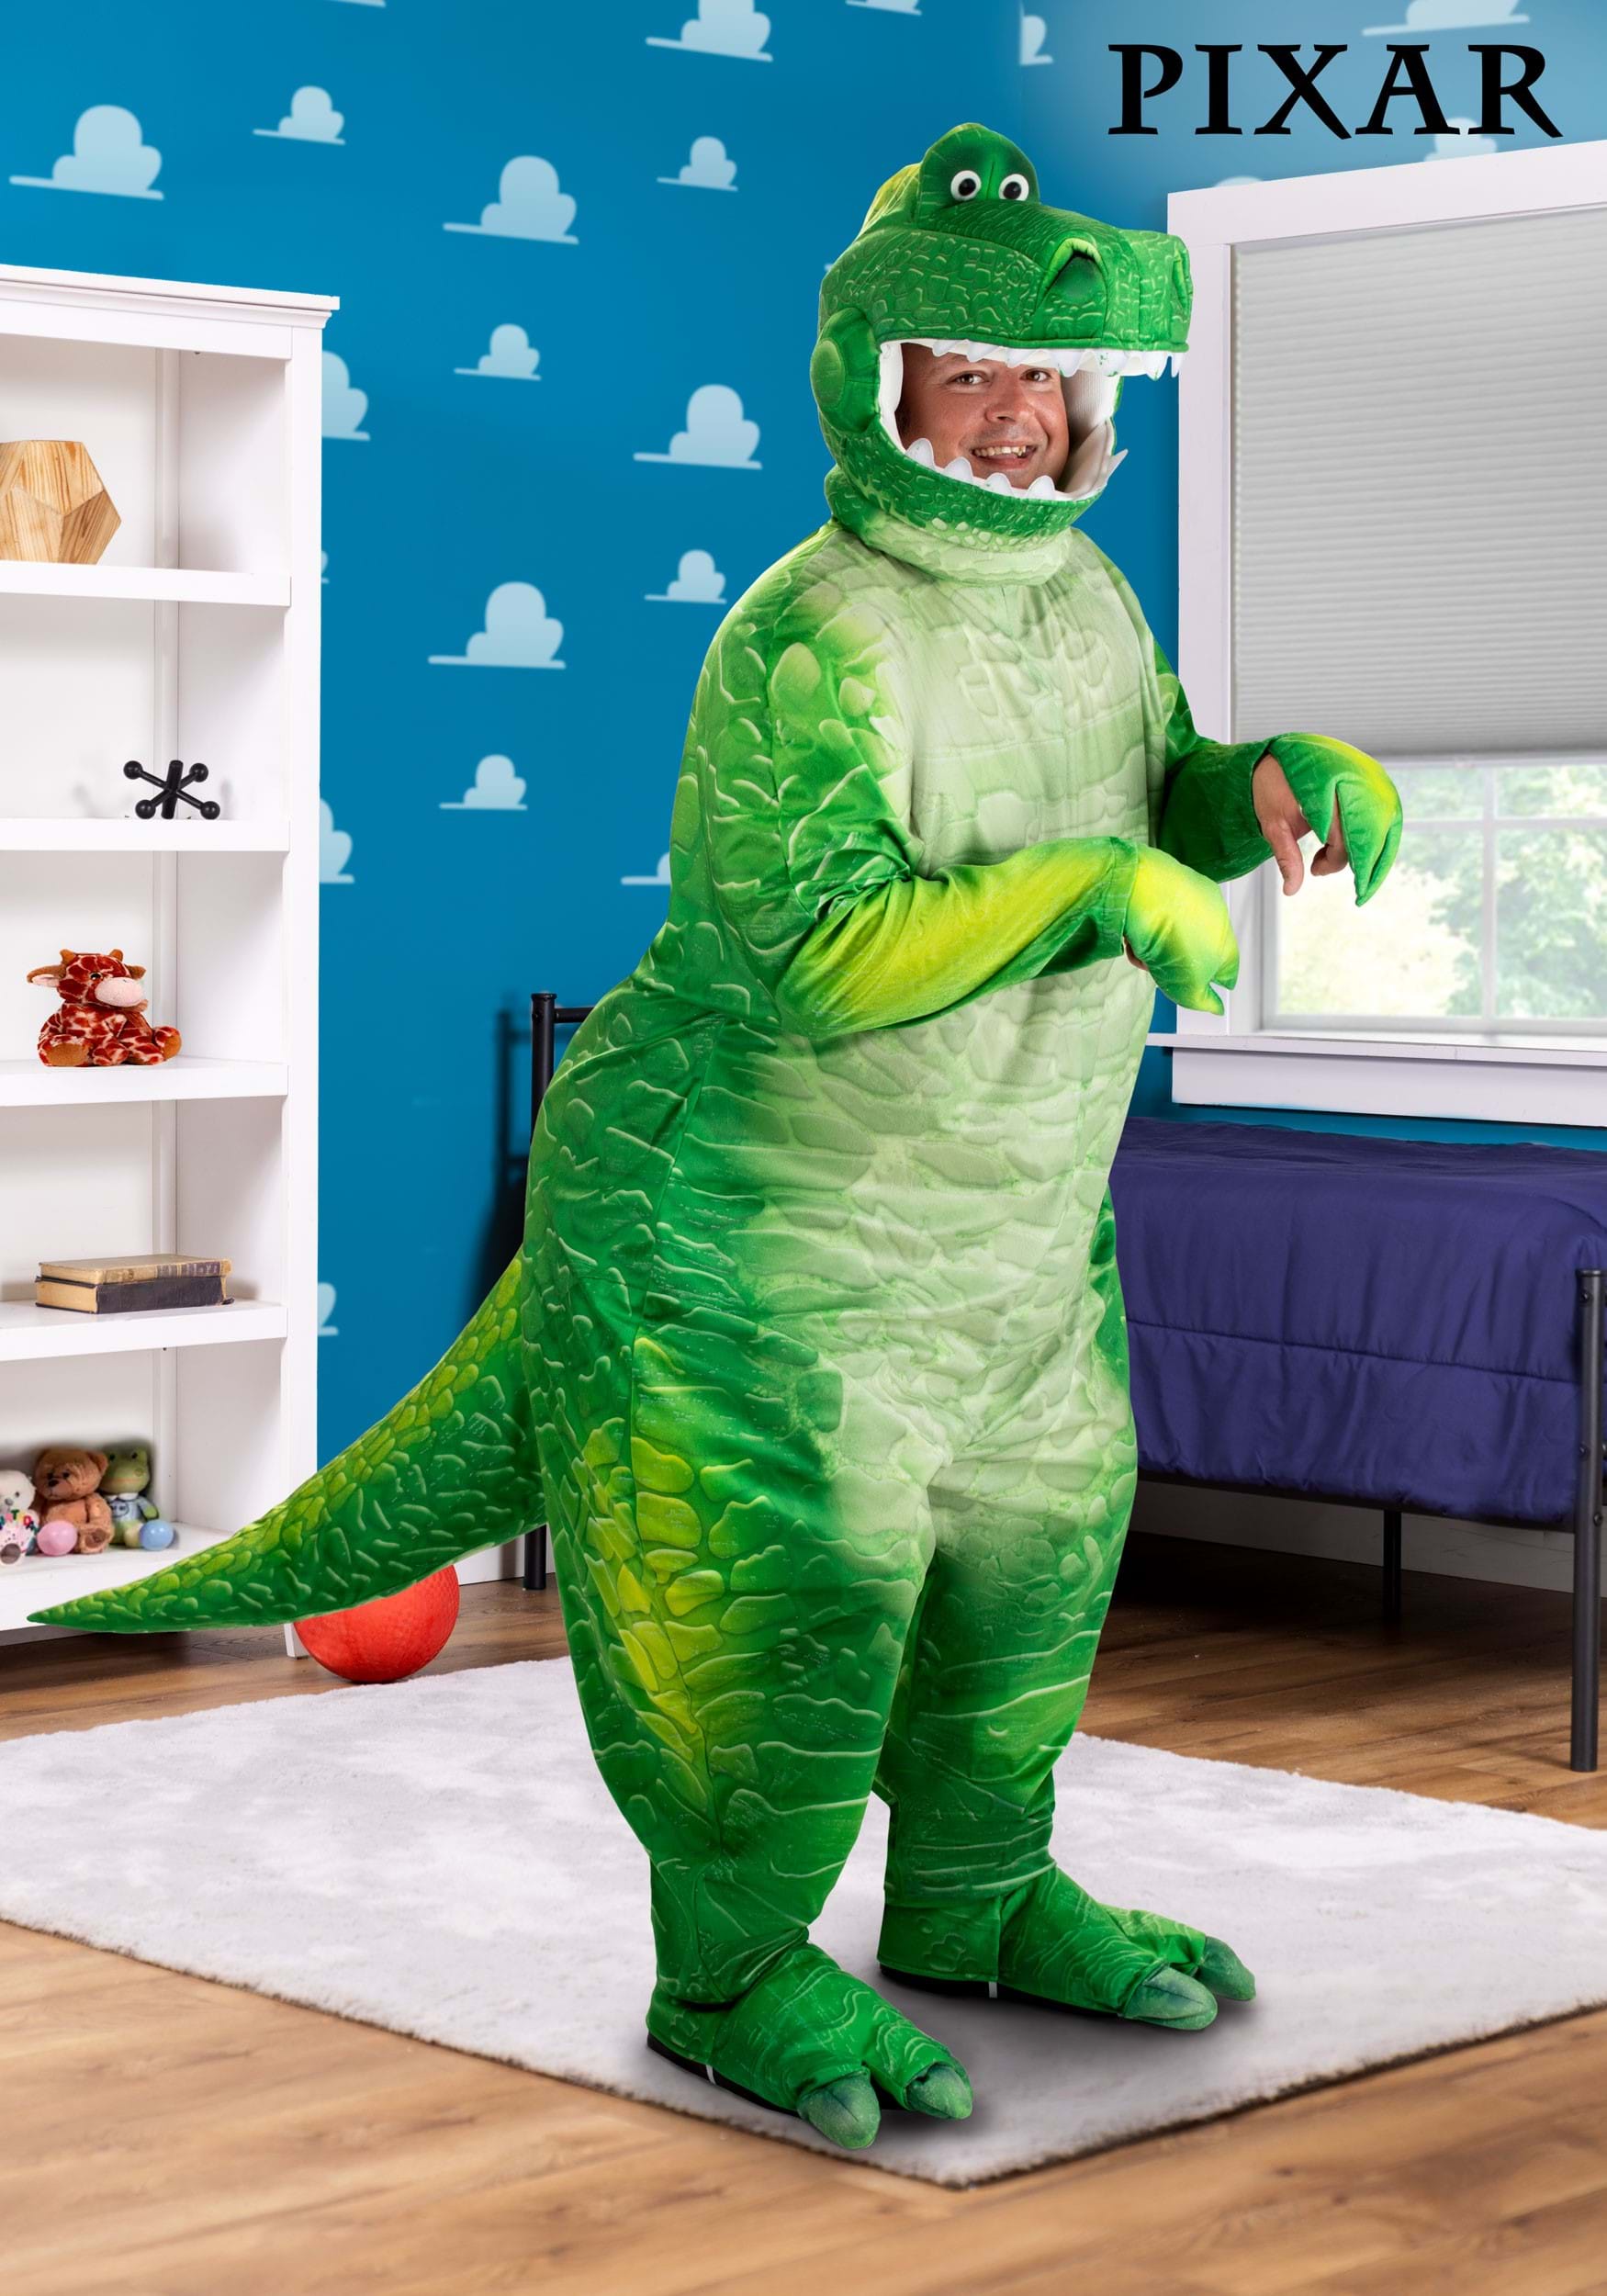 https://images.halloweencostumes.ca/products/75867/1-1/plus-size-deluxe-toy-story-rex-costume.jpg